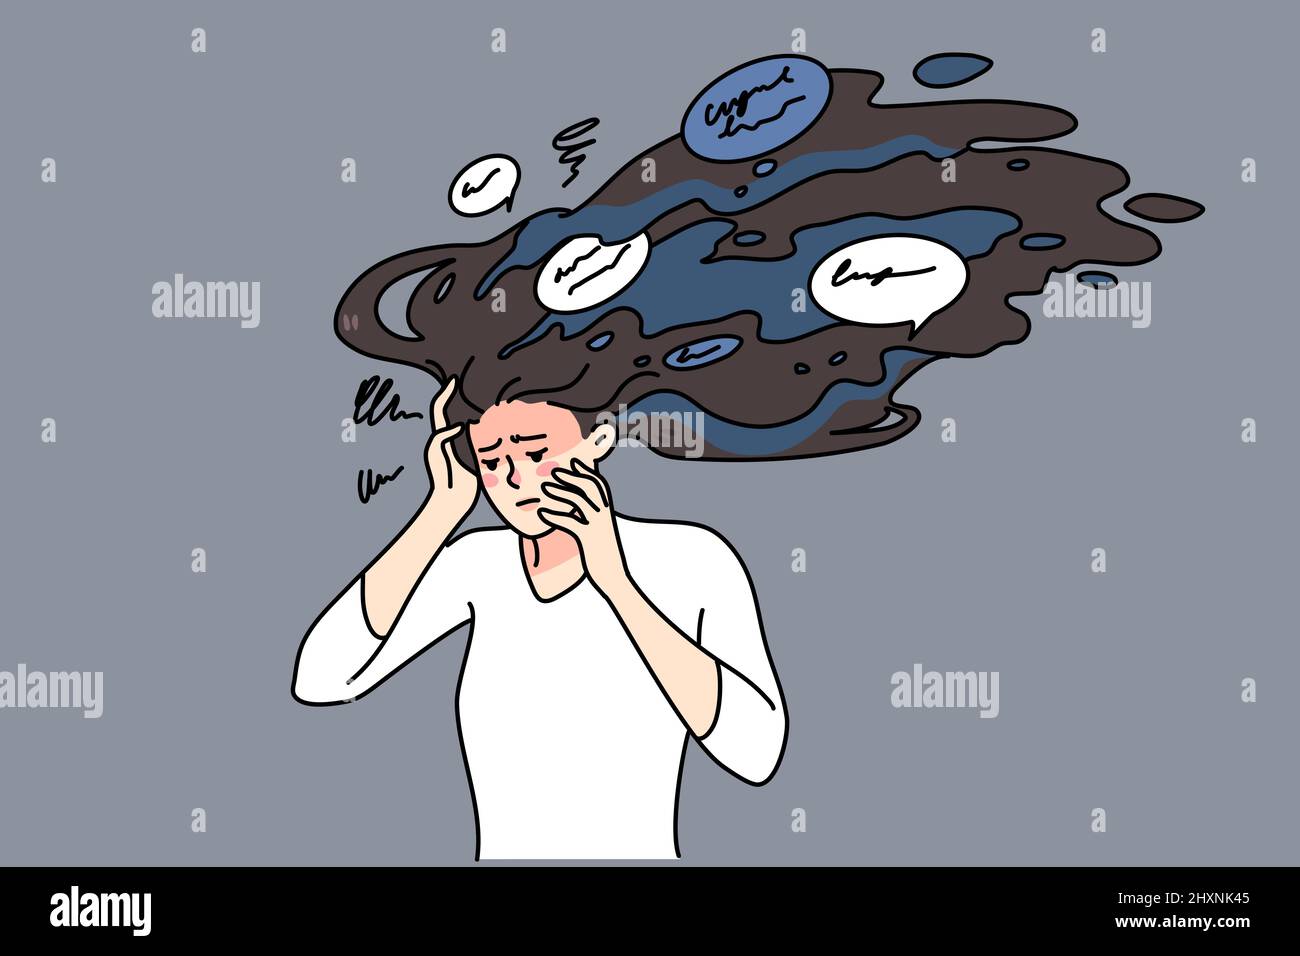 Unhappy stressed woman with paranoid thoughts in mind. Upset distressed girl suffer from panic stressful ideas, have psychological mental problems. Counseling concept. Vector illustration.  Stock Vector